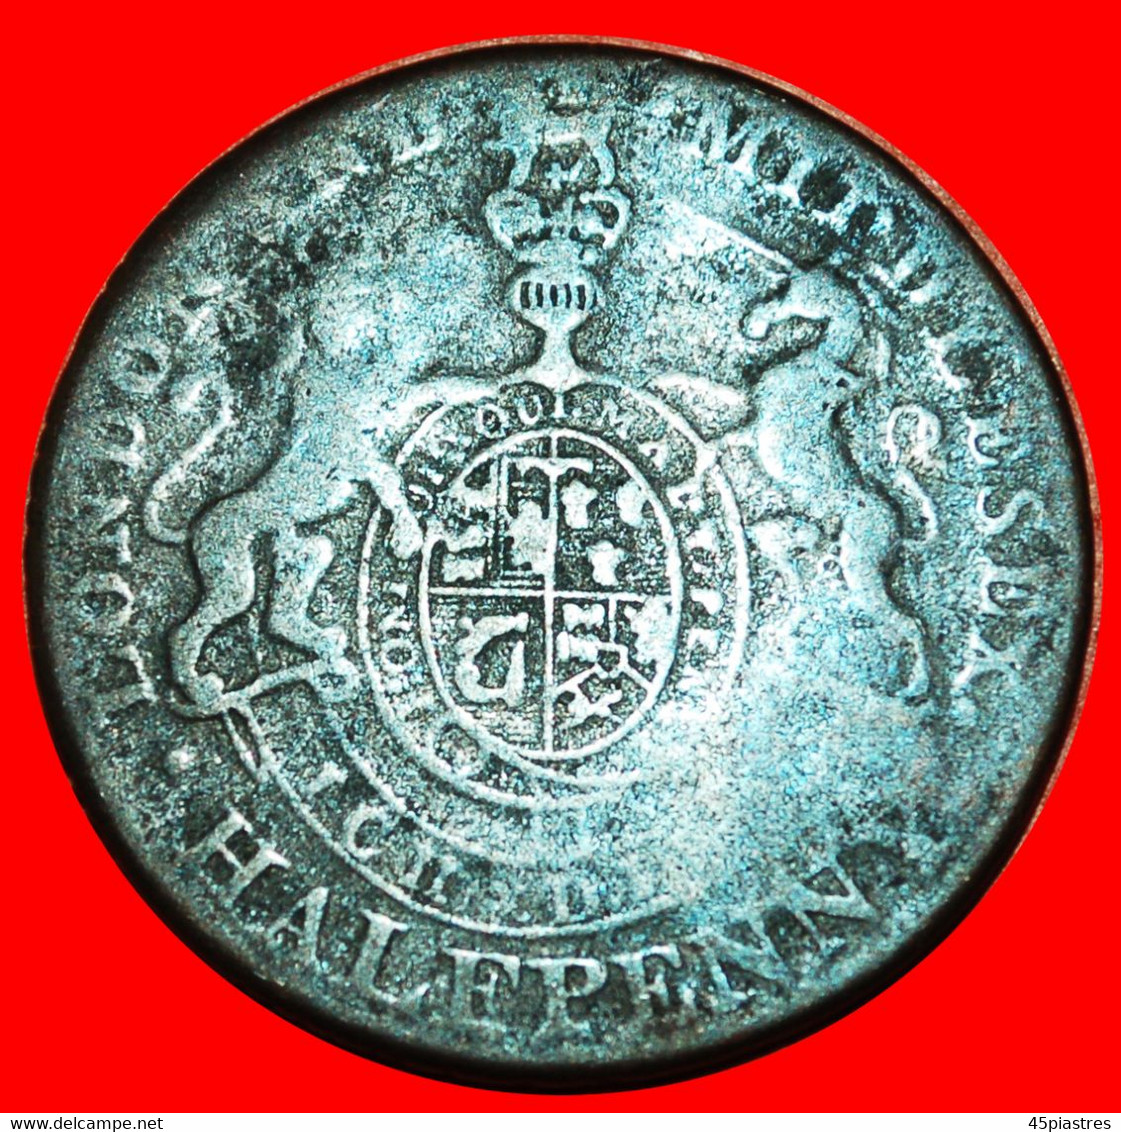 * CONDER PENNY: IRELAND And GREAT BRITAIN ★ HALFPENNY (1787-1797) GEO PRINCE OF WALES! LOW START ★ NO RESERVE! - Maundy Sets & Commemorative